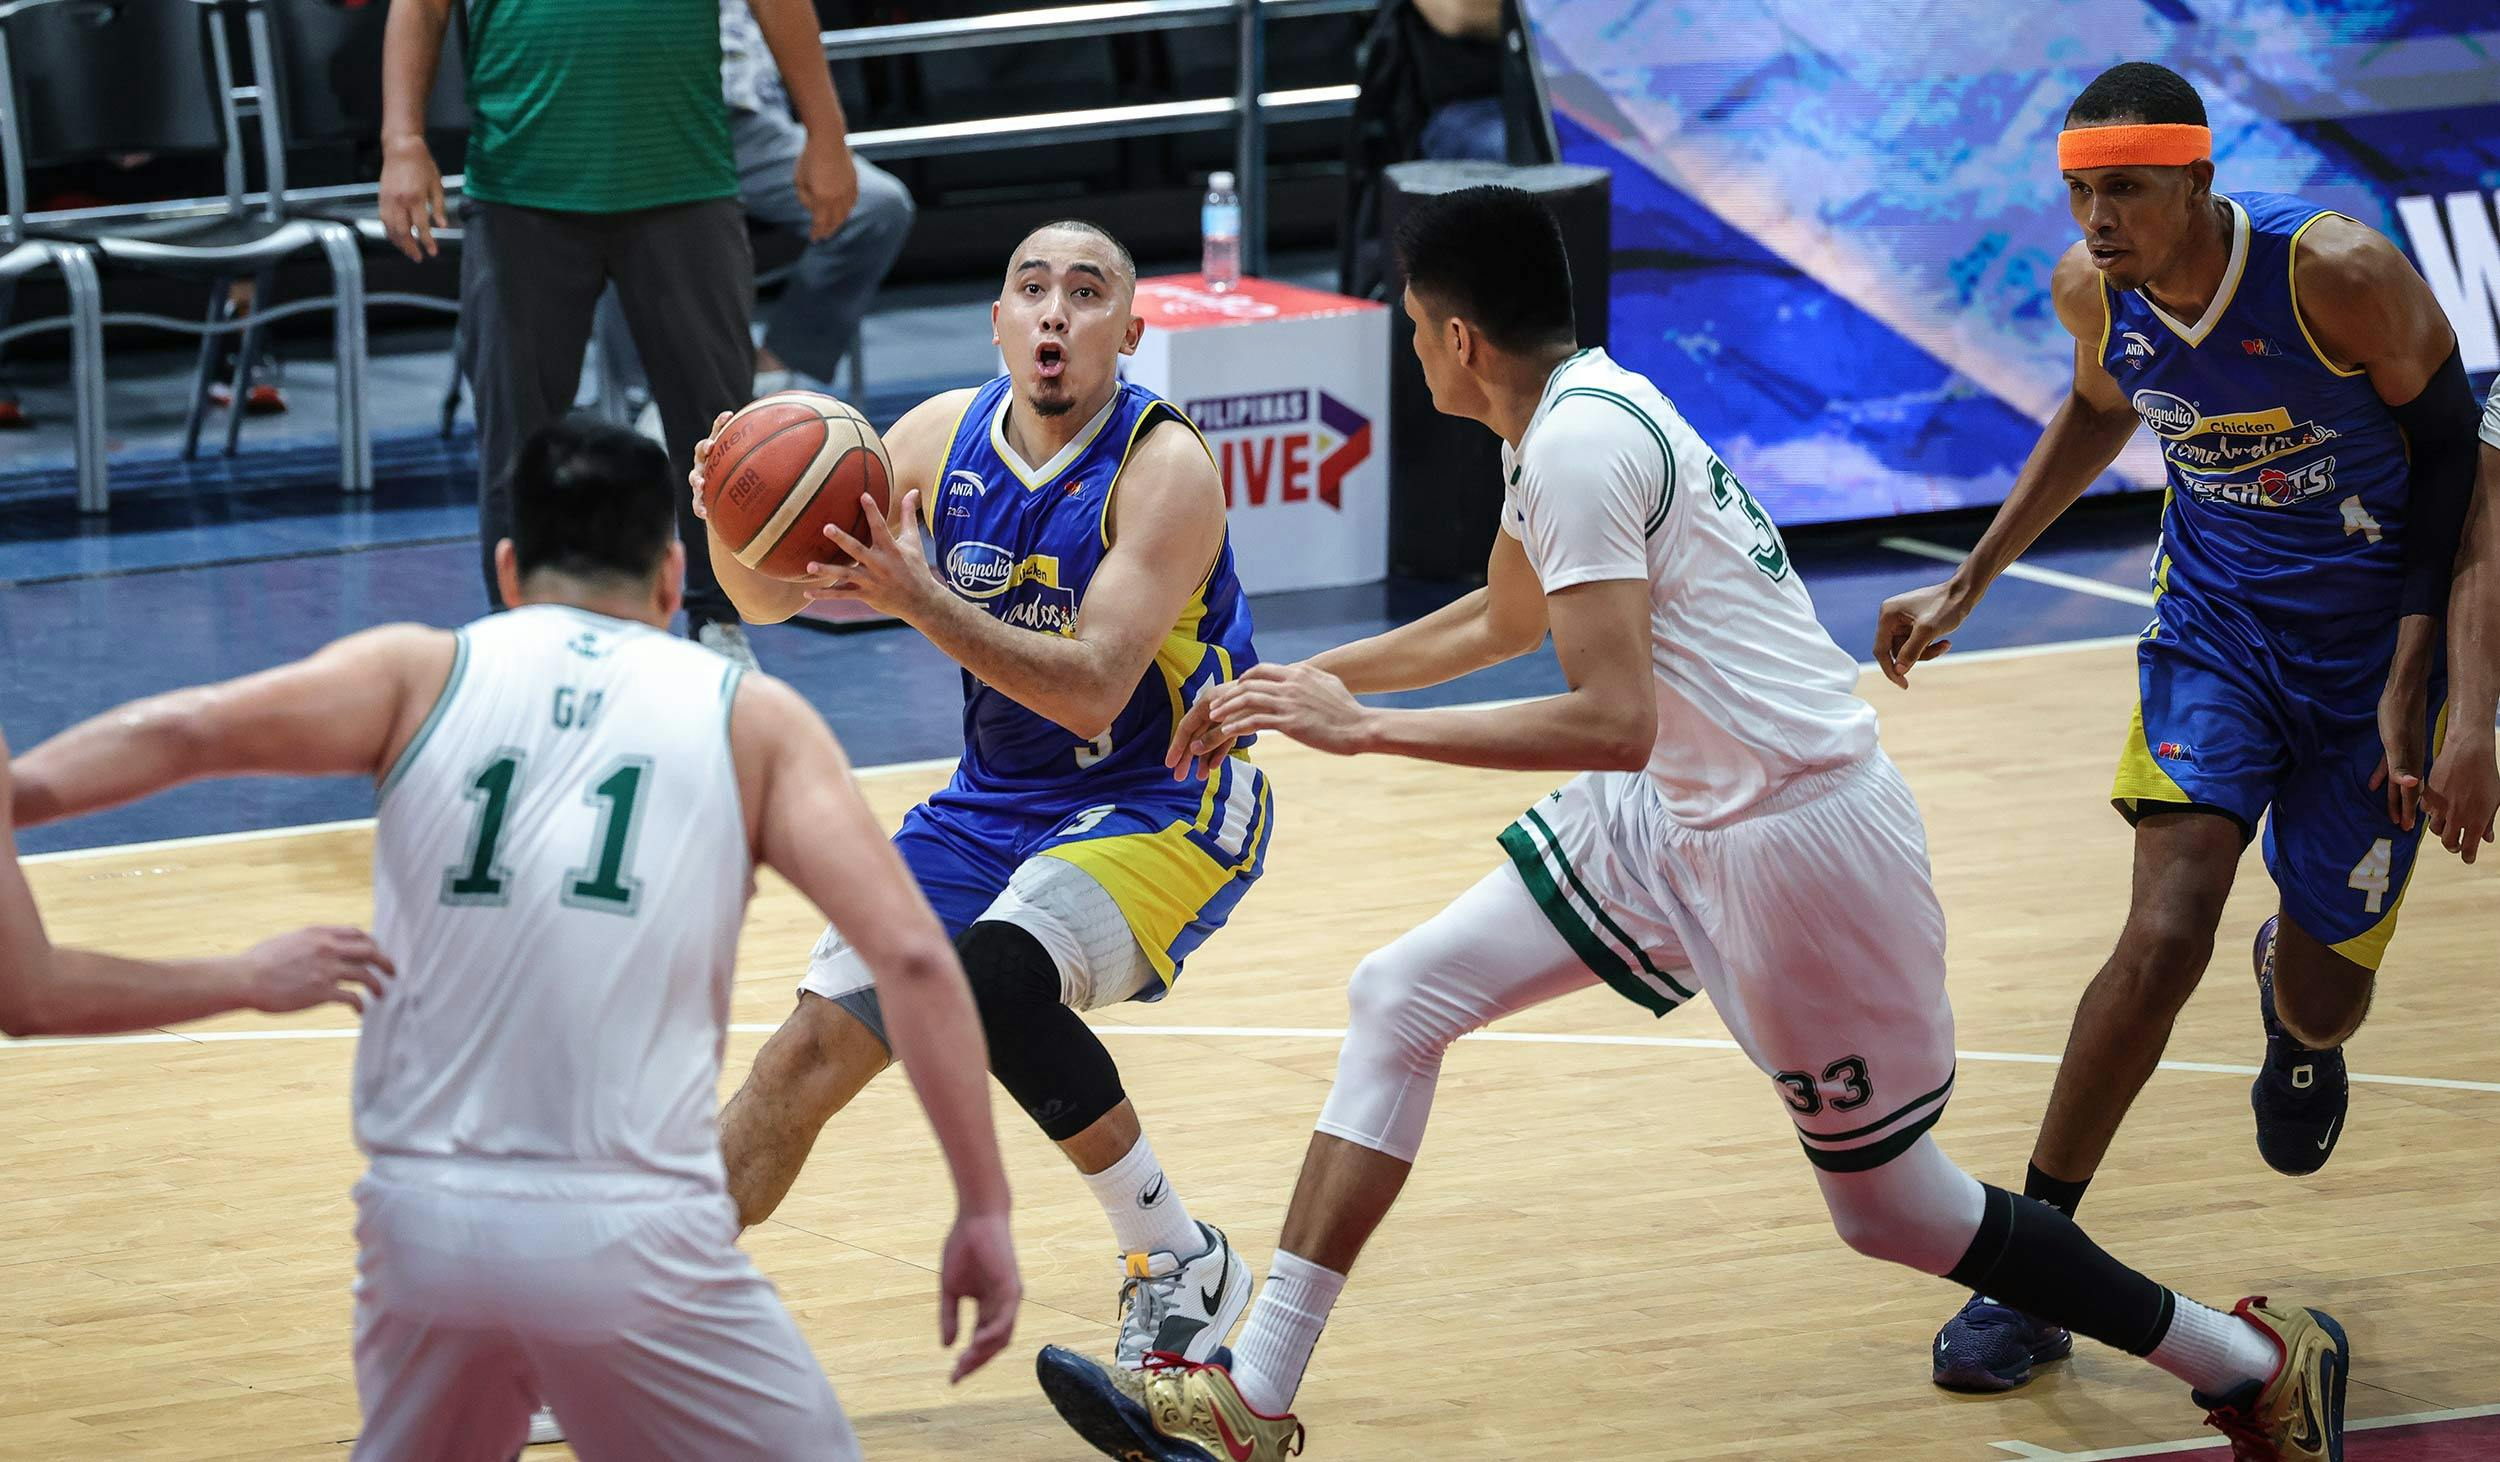 PBA: Veterans come through as Magnolia holds off Terrafirma, secures playoff seat